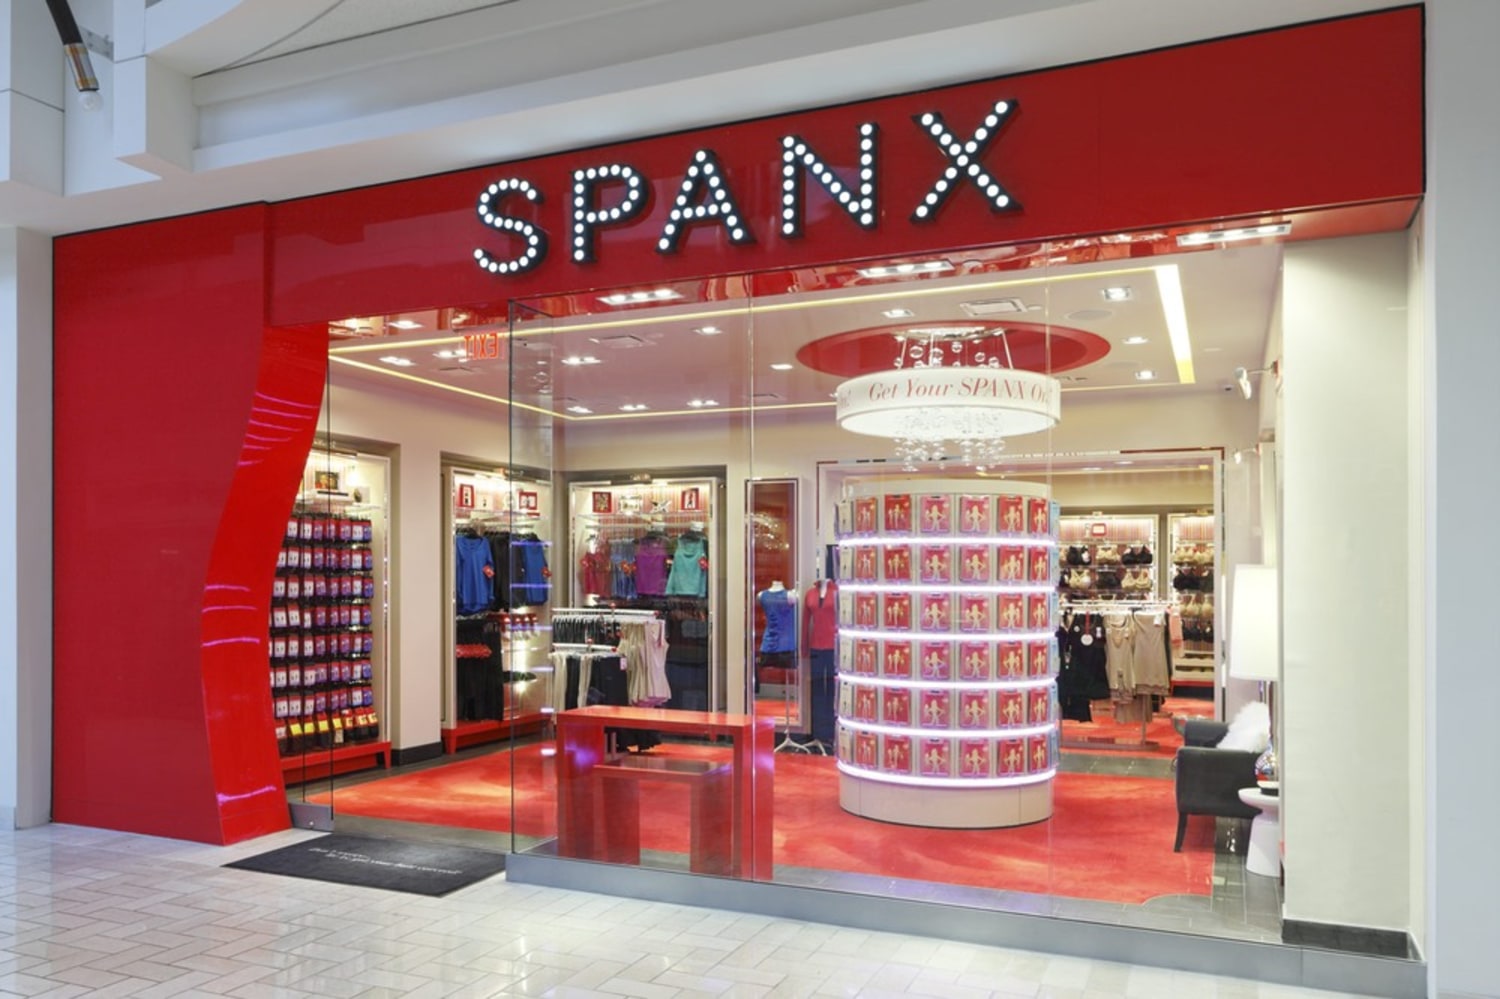 Spanx: Your Way From plus size - Arnotts Department Store